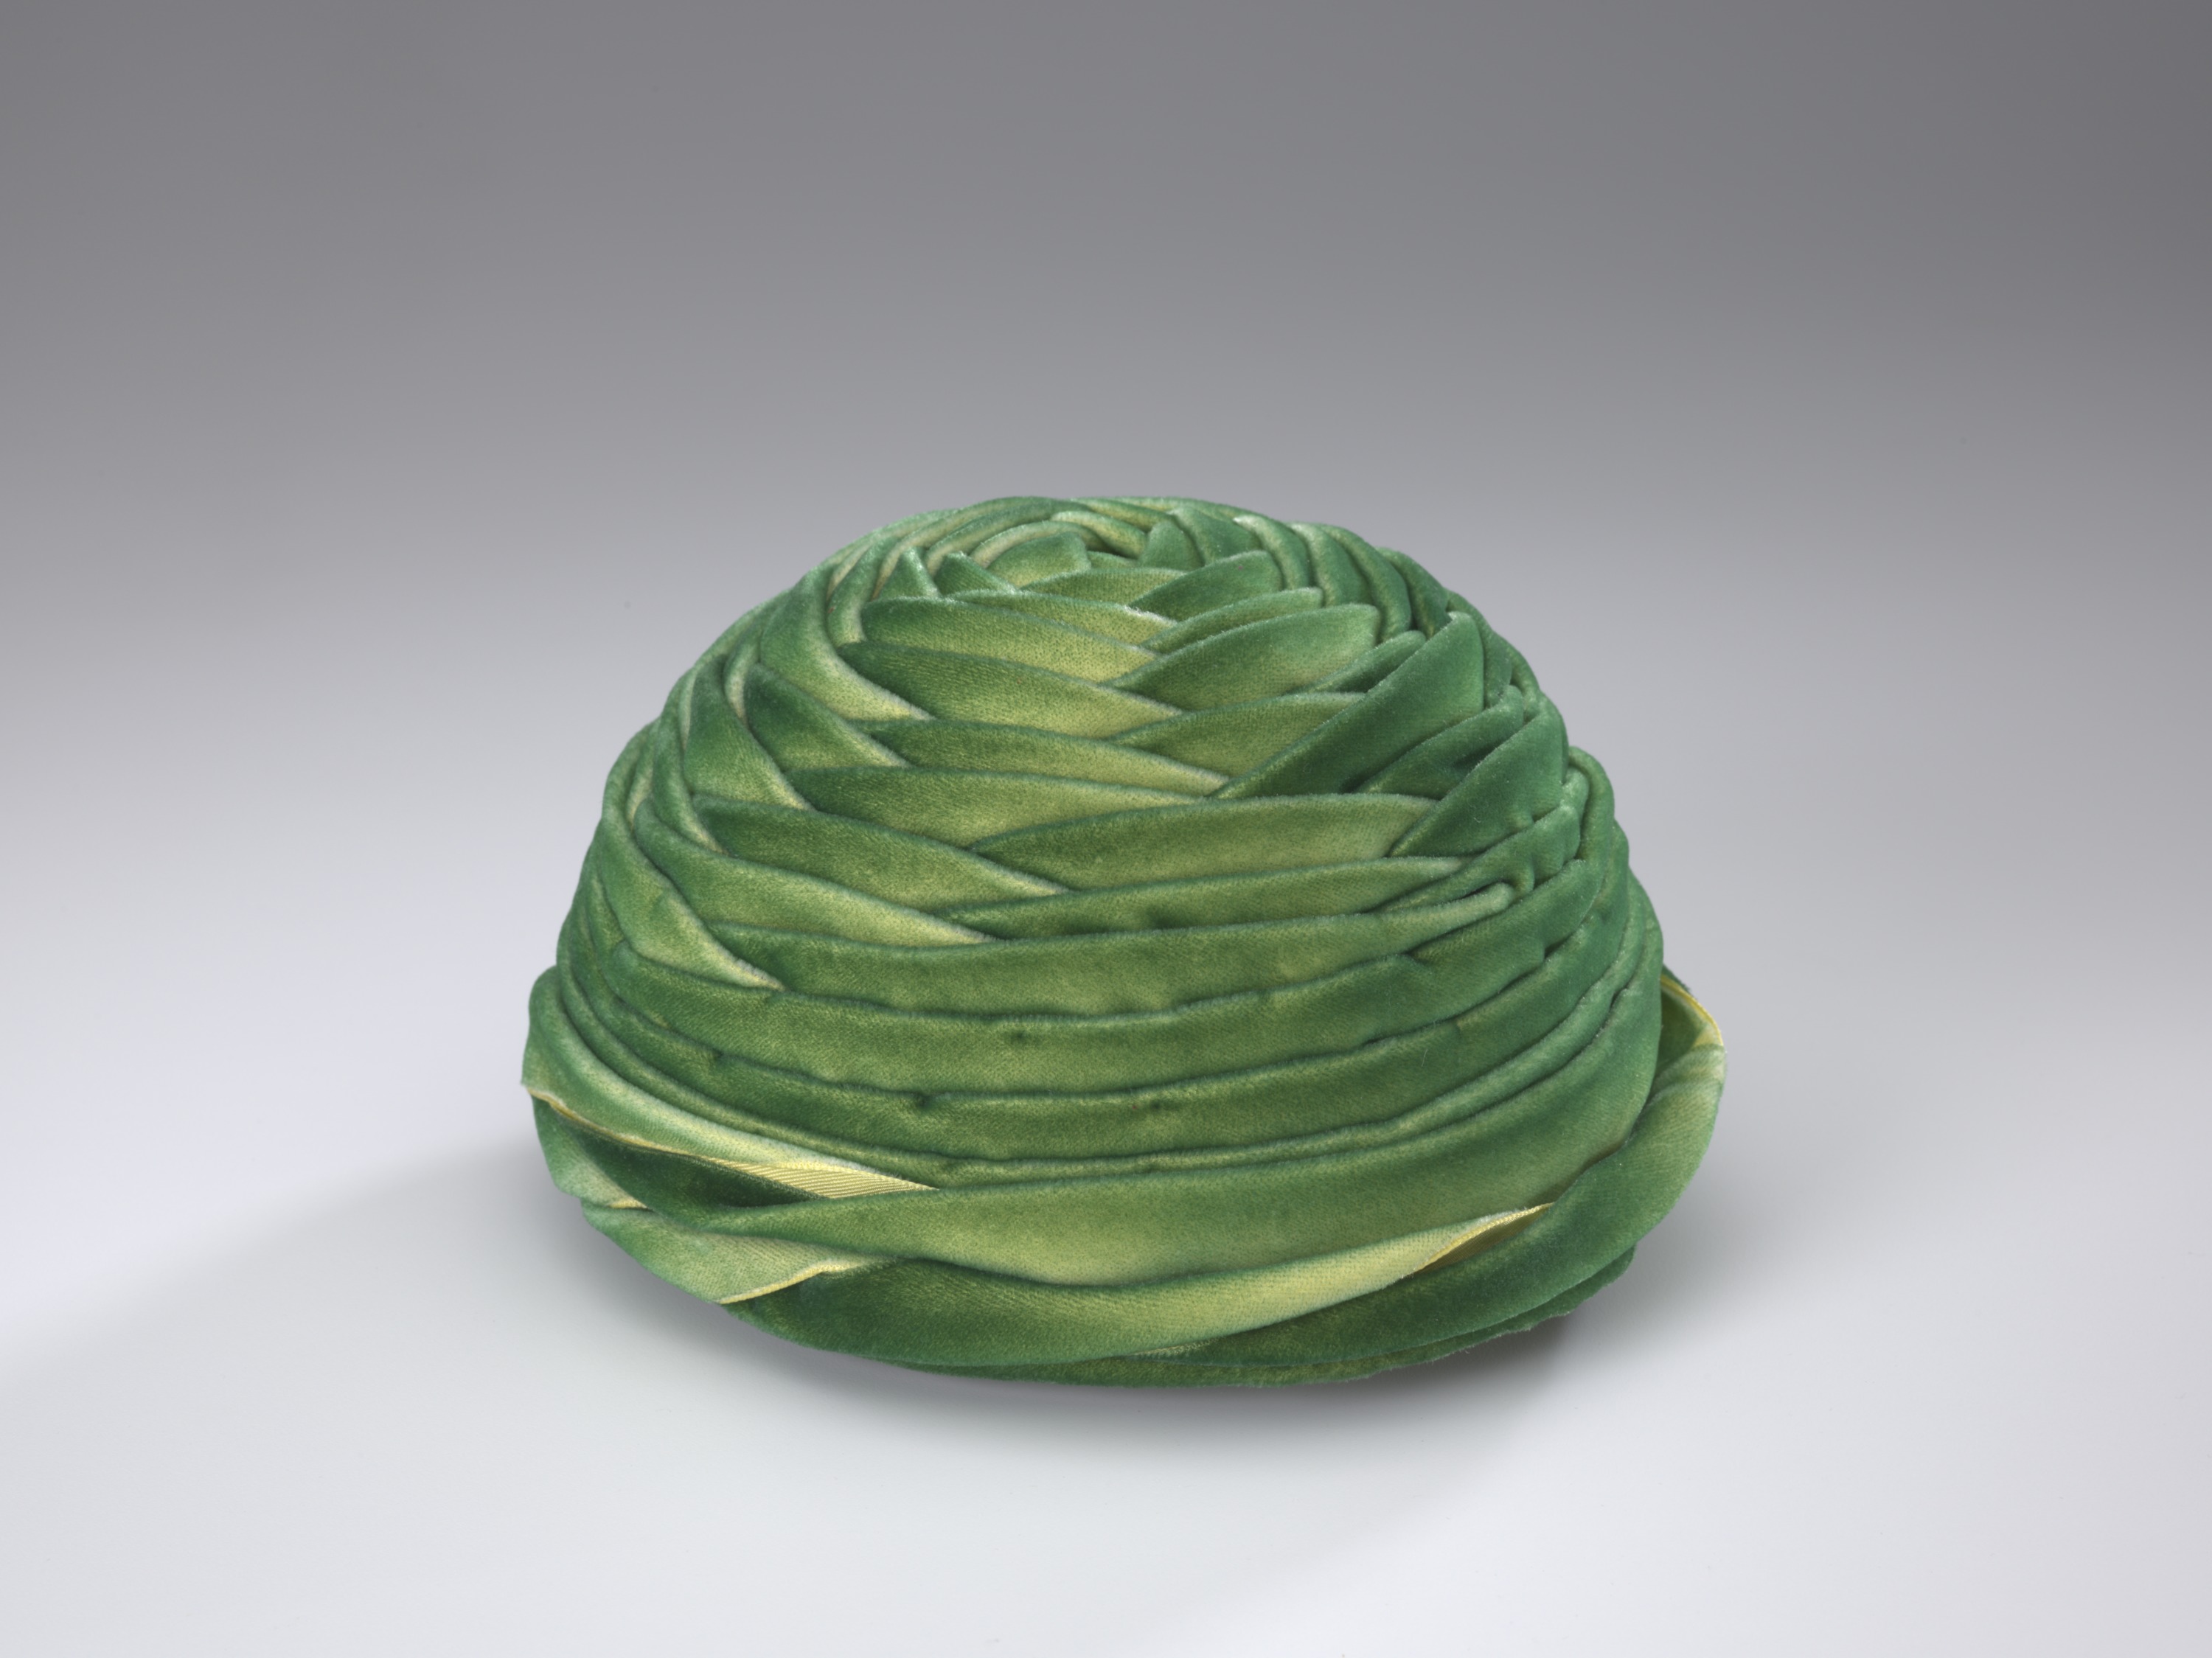 Green velveteen hat. It is circular with layers of fabric in a wrapped design.